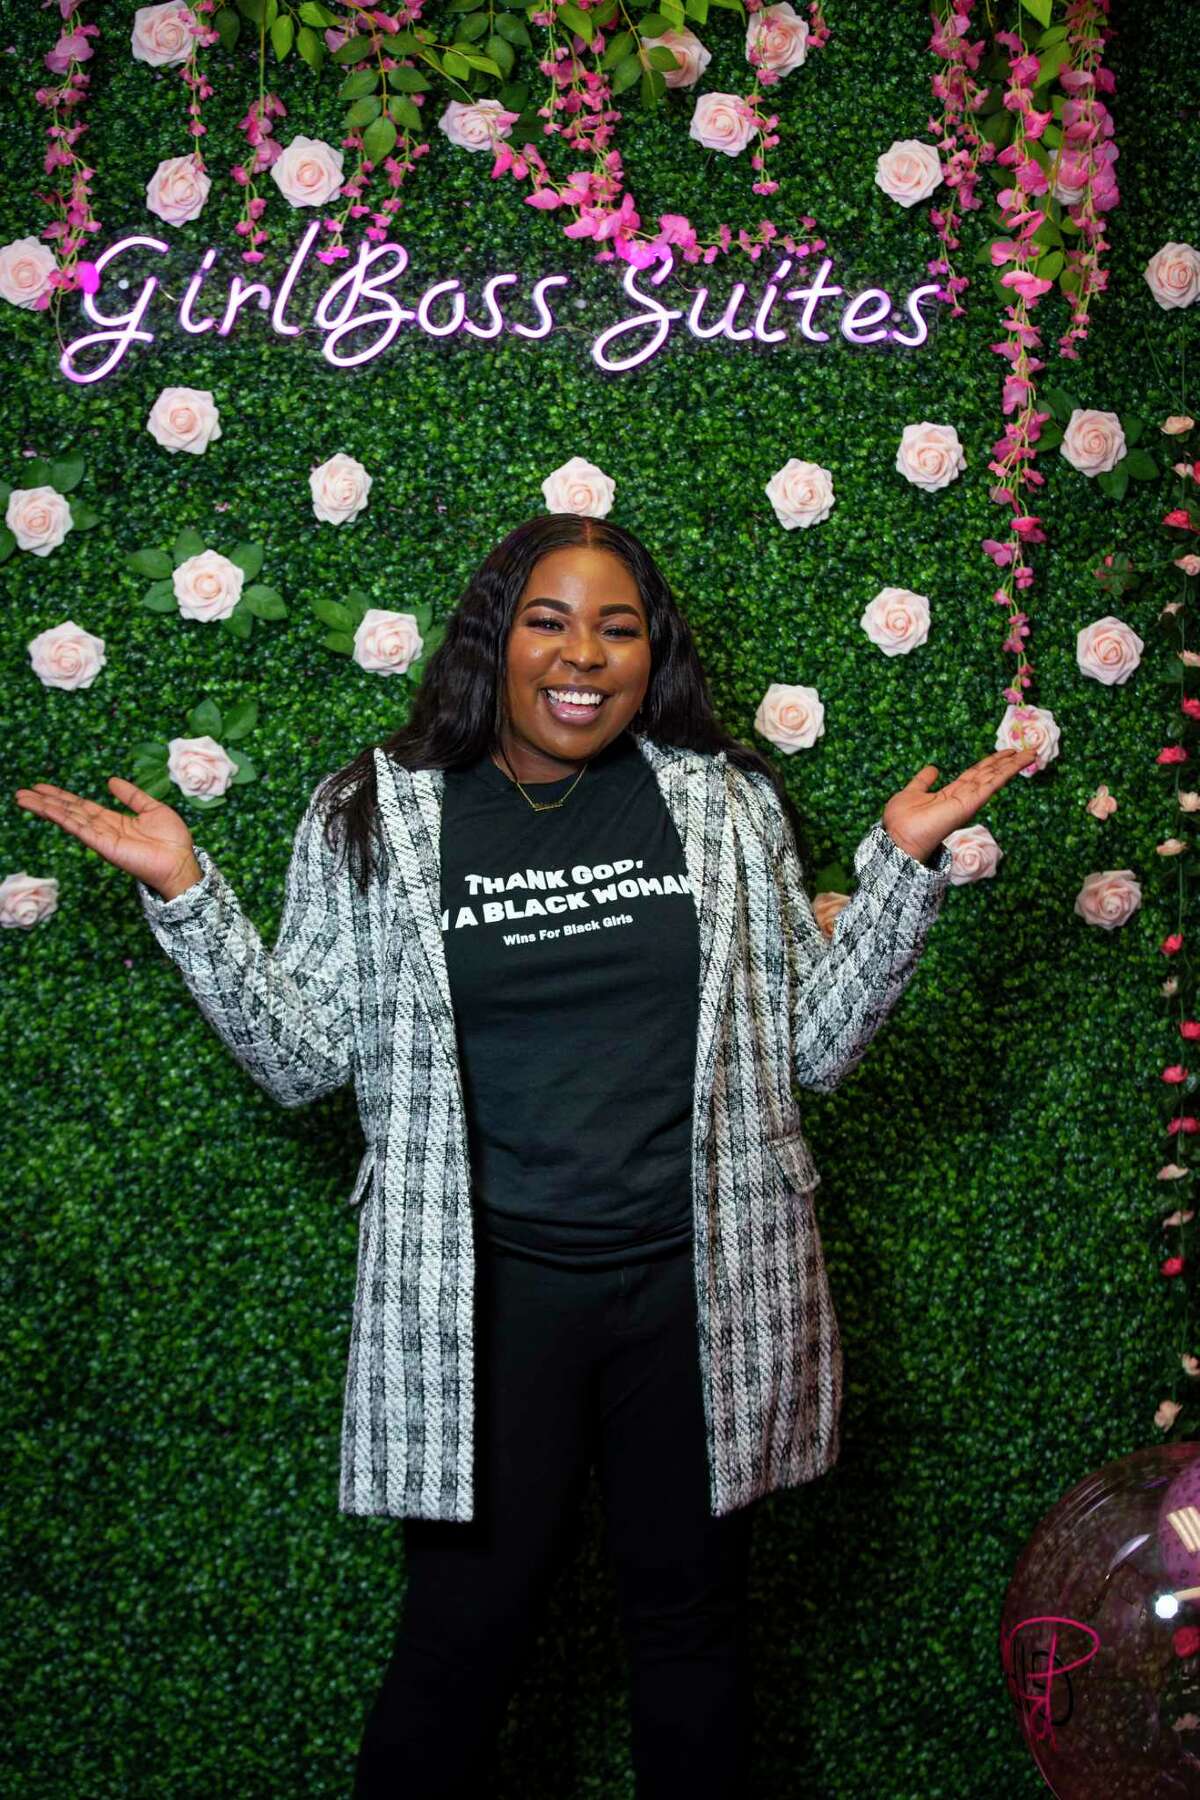 Tierra Smith, who started a new media company called Wins for Black Girls, is hosting a pop-up market called Black Women Marketplace that will be holding a holiday market this weekend. Photographed at GirlBoss Suites, a co-working space where Smith does much of her work, Wednesday, Dec. 15, 2021, in Houston.